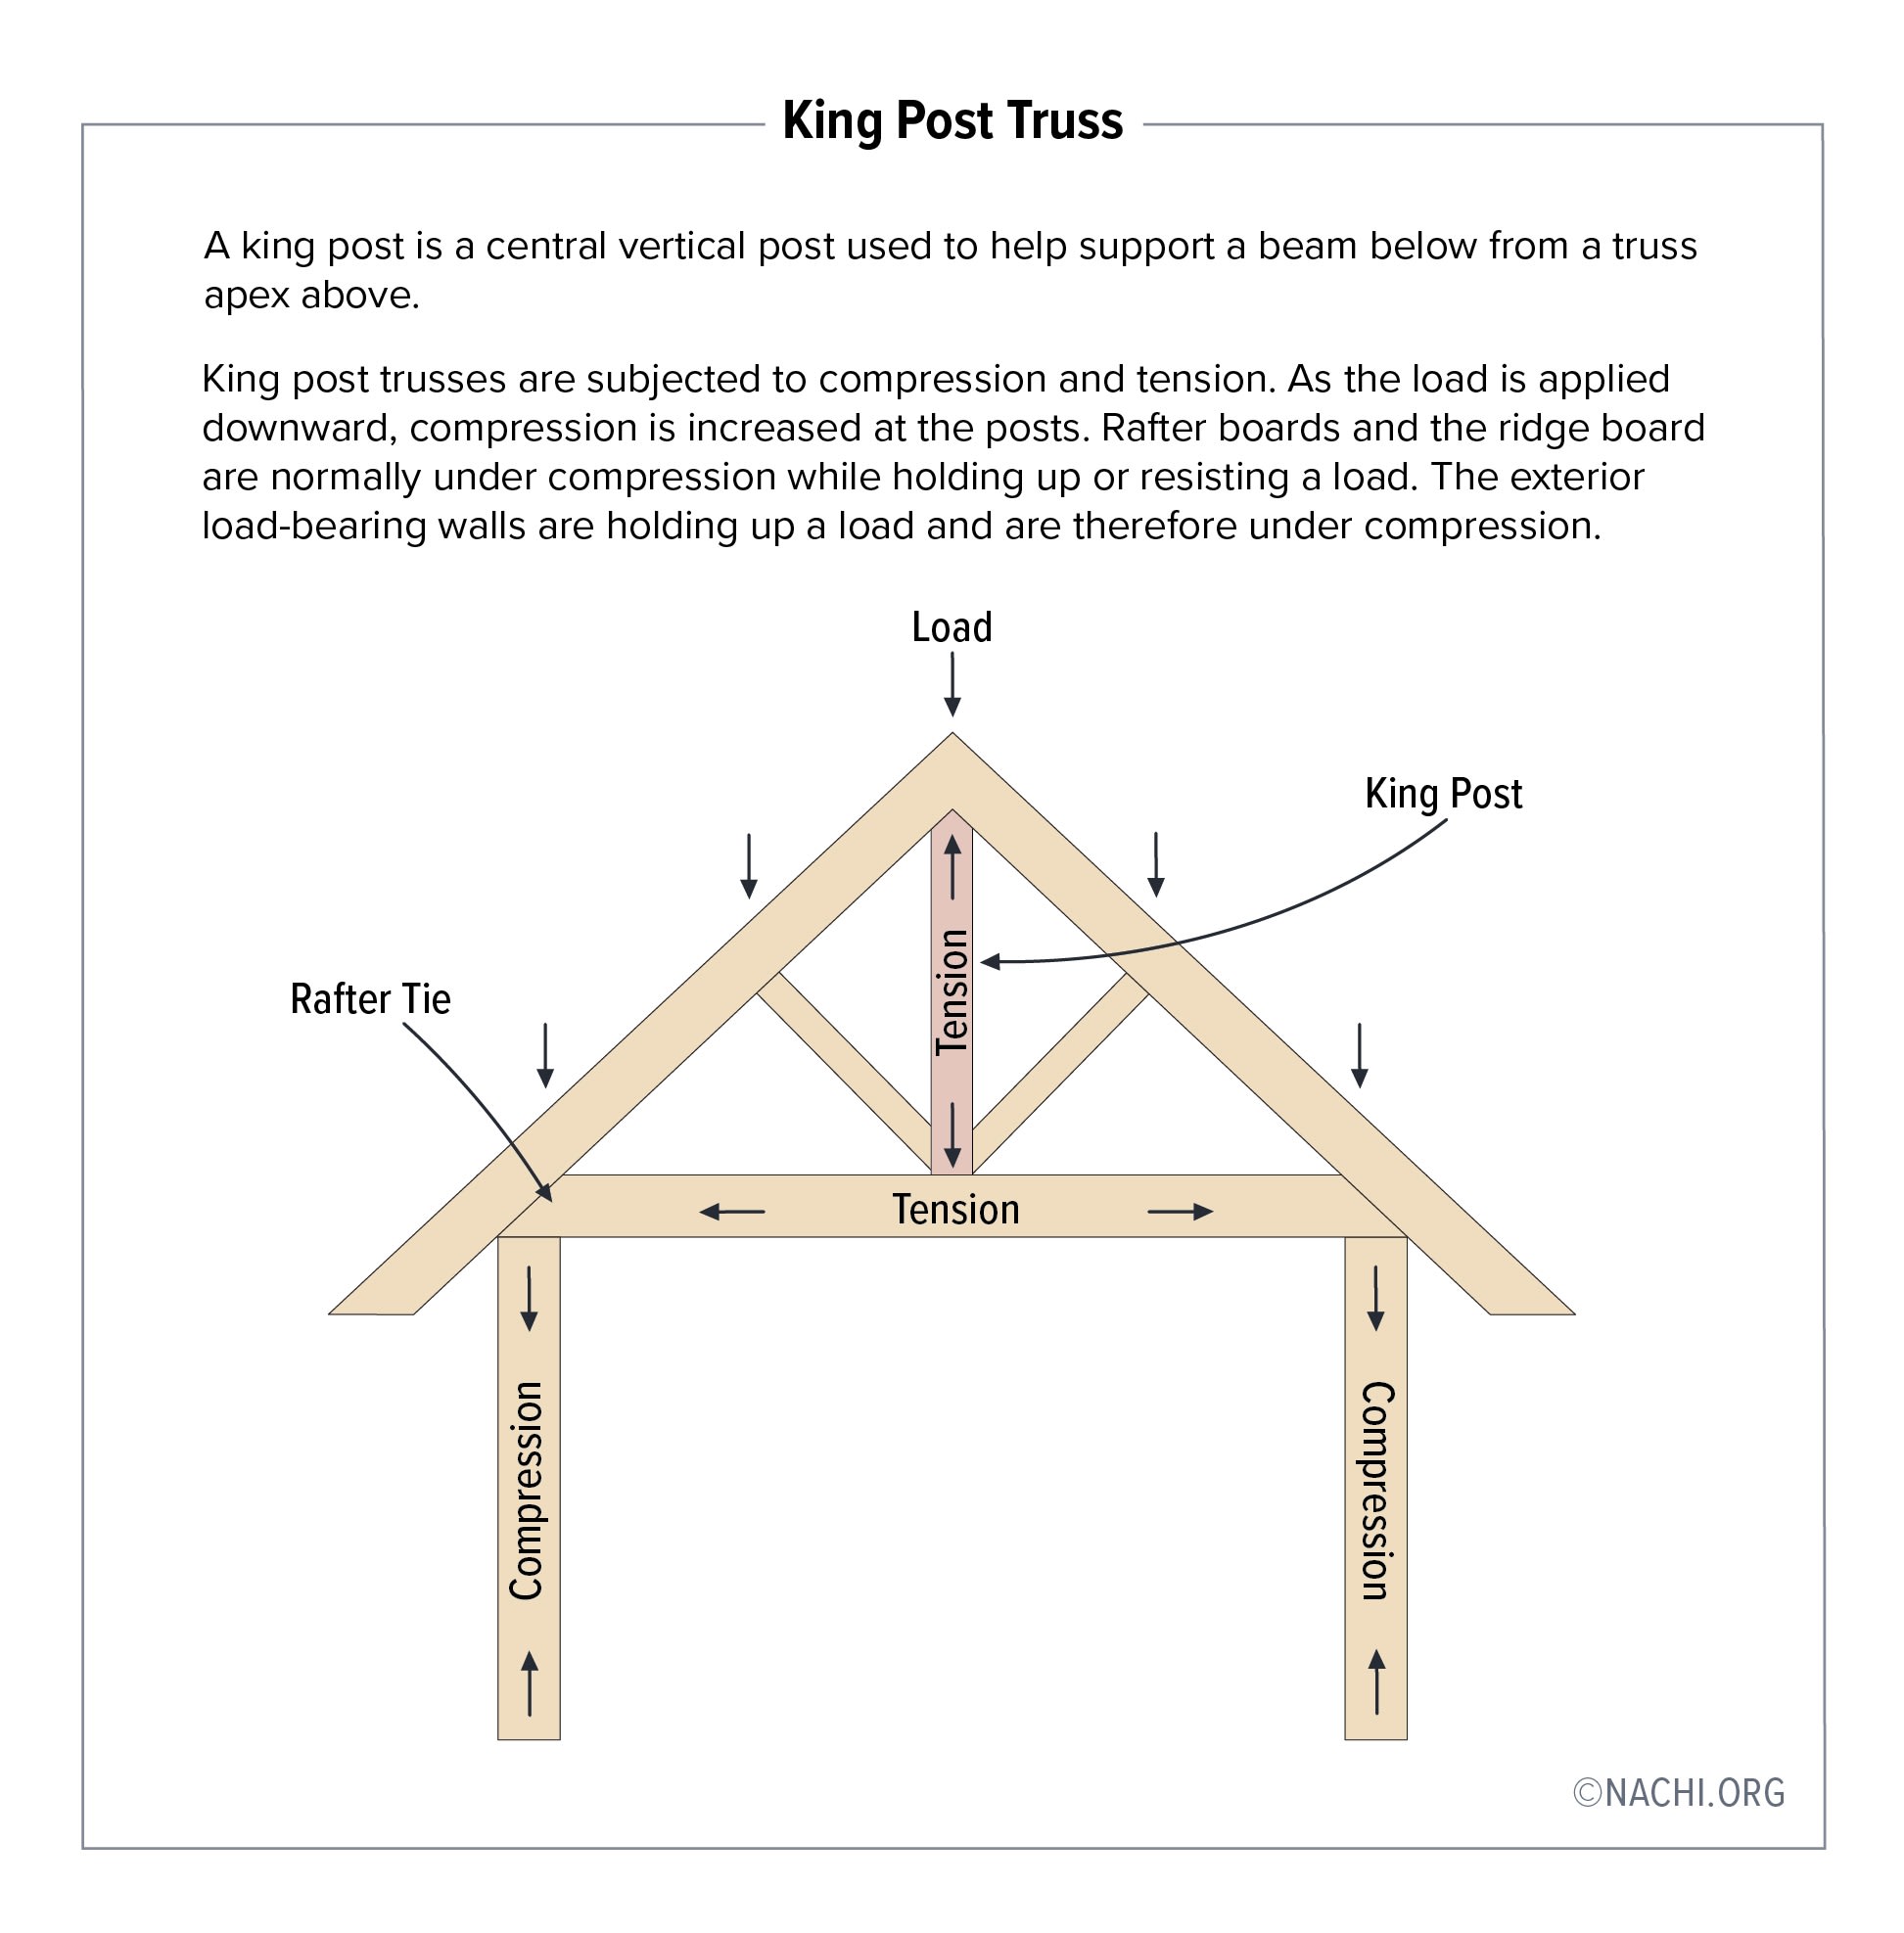 A king post truss is a vertical post used to help support a beam below from a truss apex above.

King post trusses are subjected to compression and tension. As the load is applied downward, compression is increased at the posts. Rafter boards and the ridge board are normally under compression while holding up or resisting a load. The exterior load-bearing walls are holding up a load and are therefore under compression.